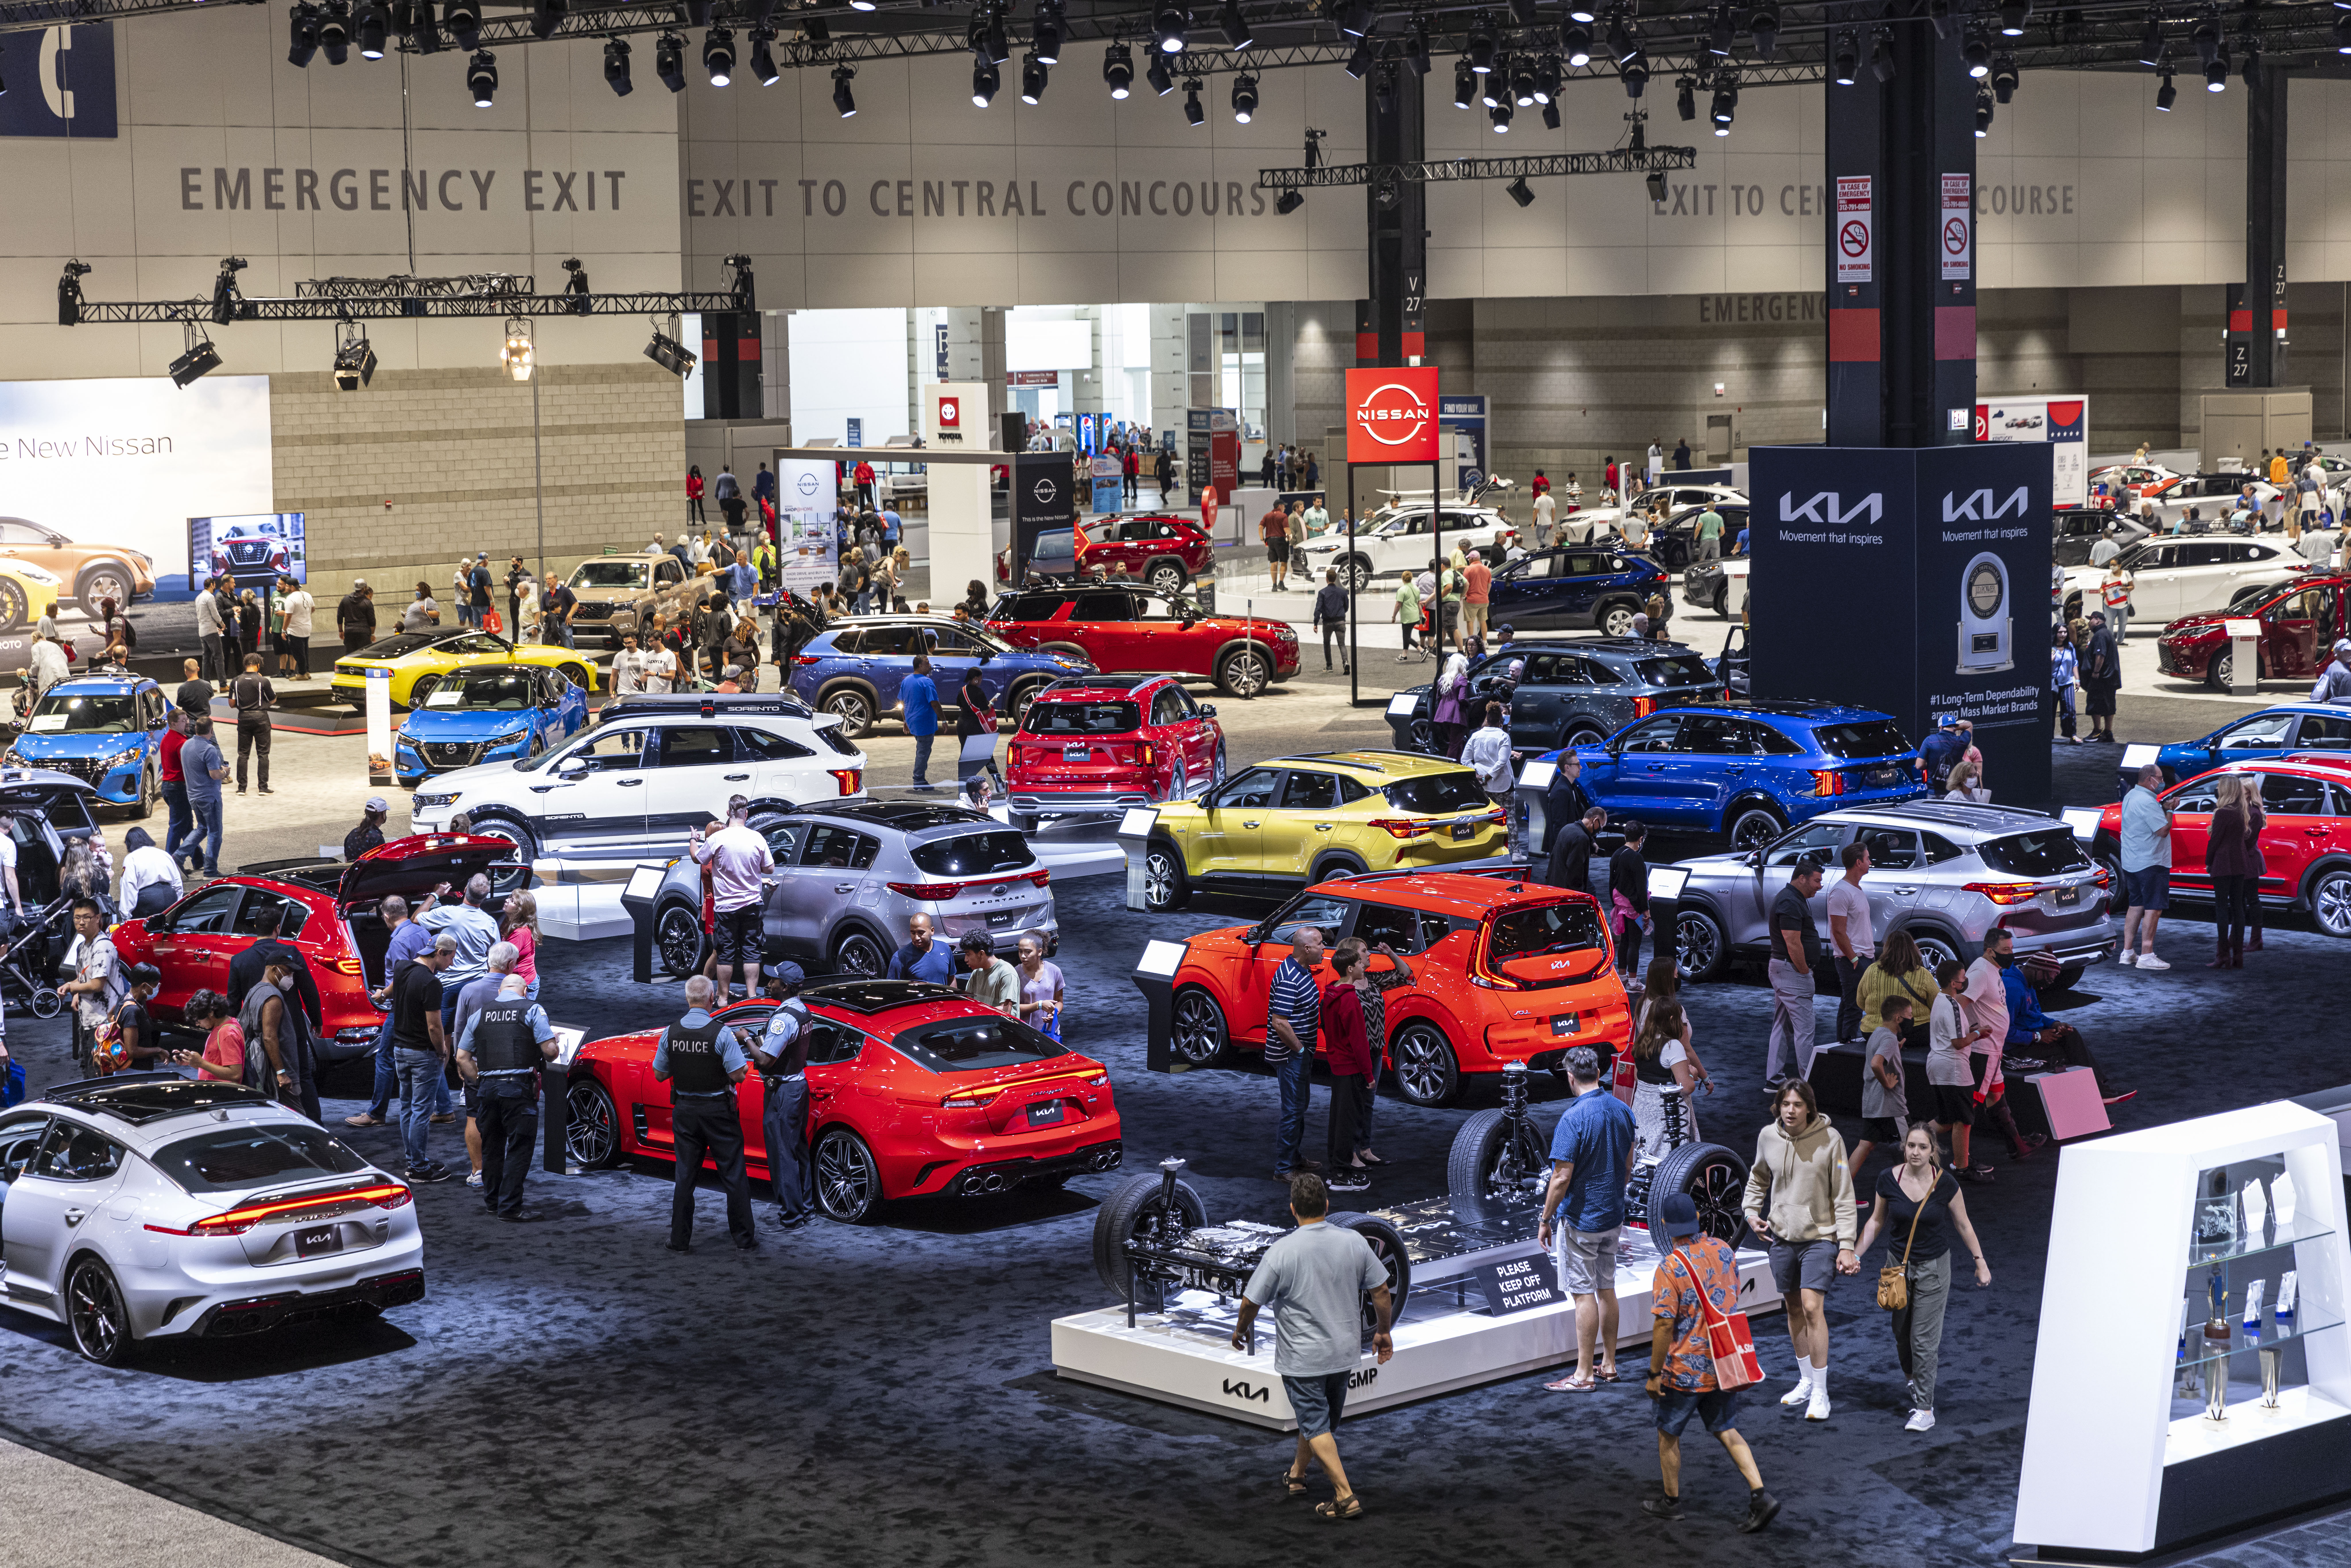 Crowds of people walk the floor checking out different vehicles at the Chicago Auto Show at the McCormick Place West Building in South Loop, Thursday, July 15, 2021.